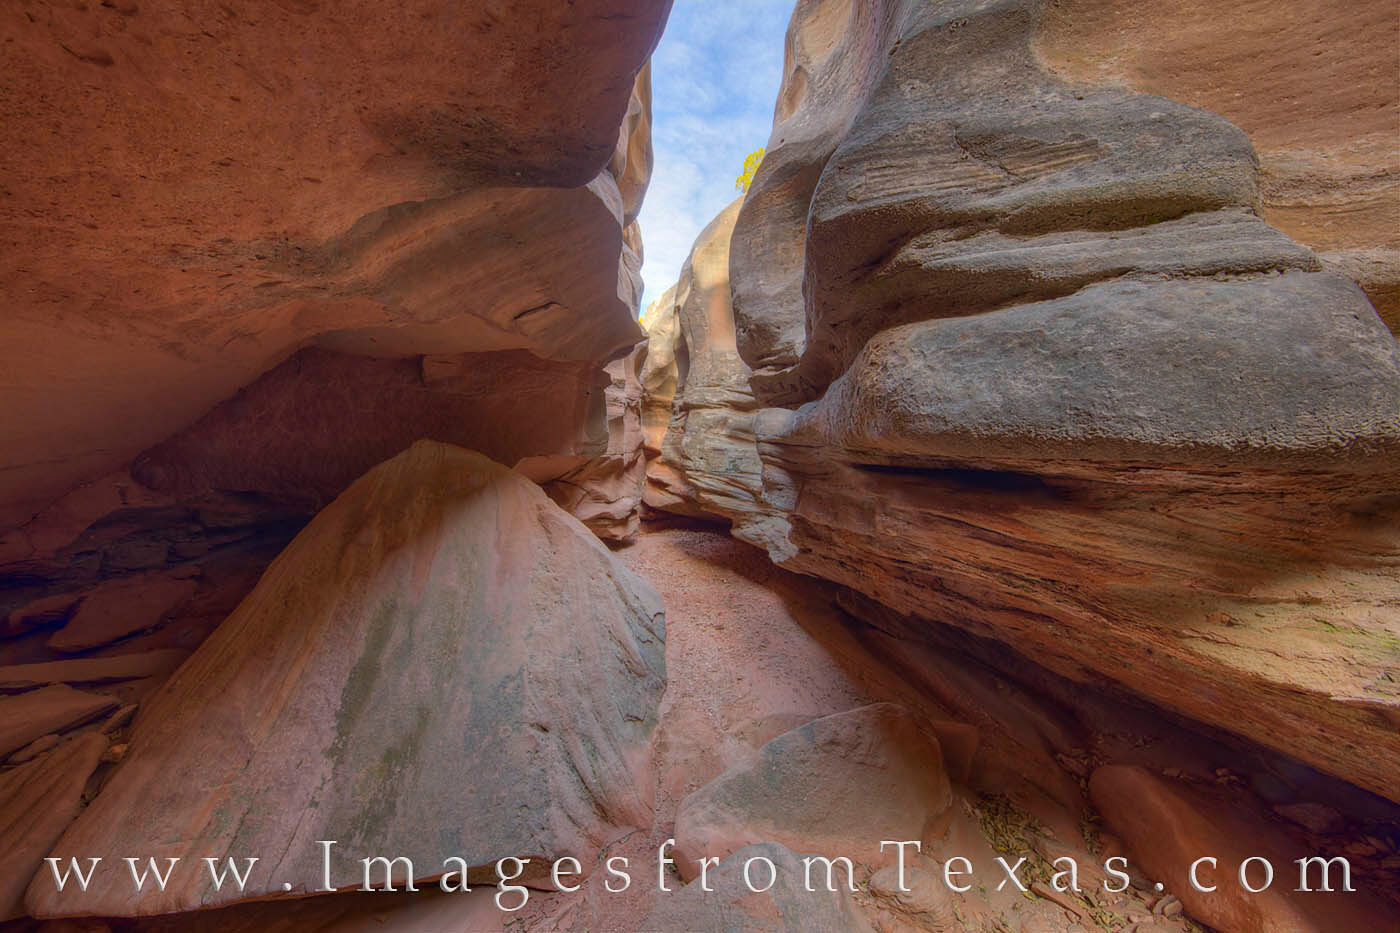 This slot canyon in the lower portion of Central Utah Canyon radiates indirect orange sunlight on a cool November morning. The...